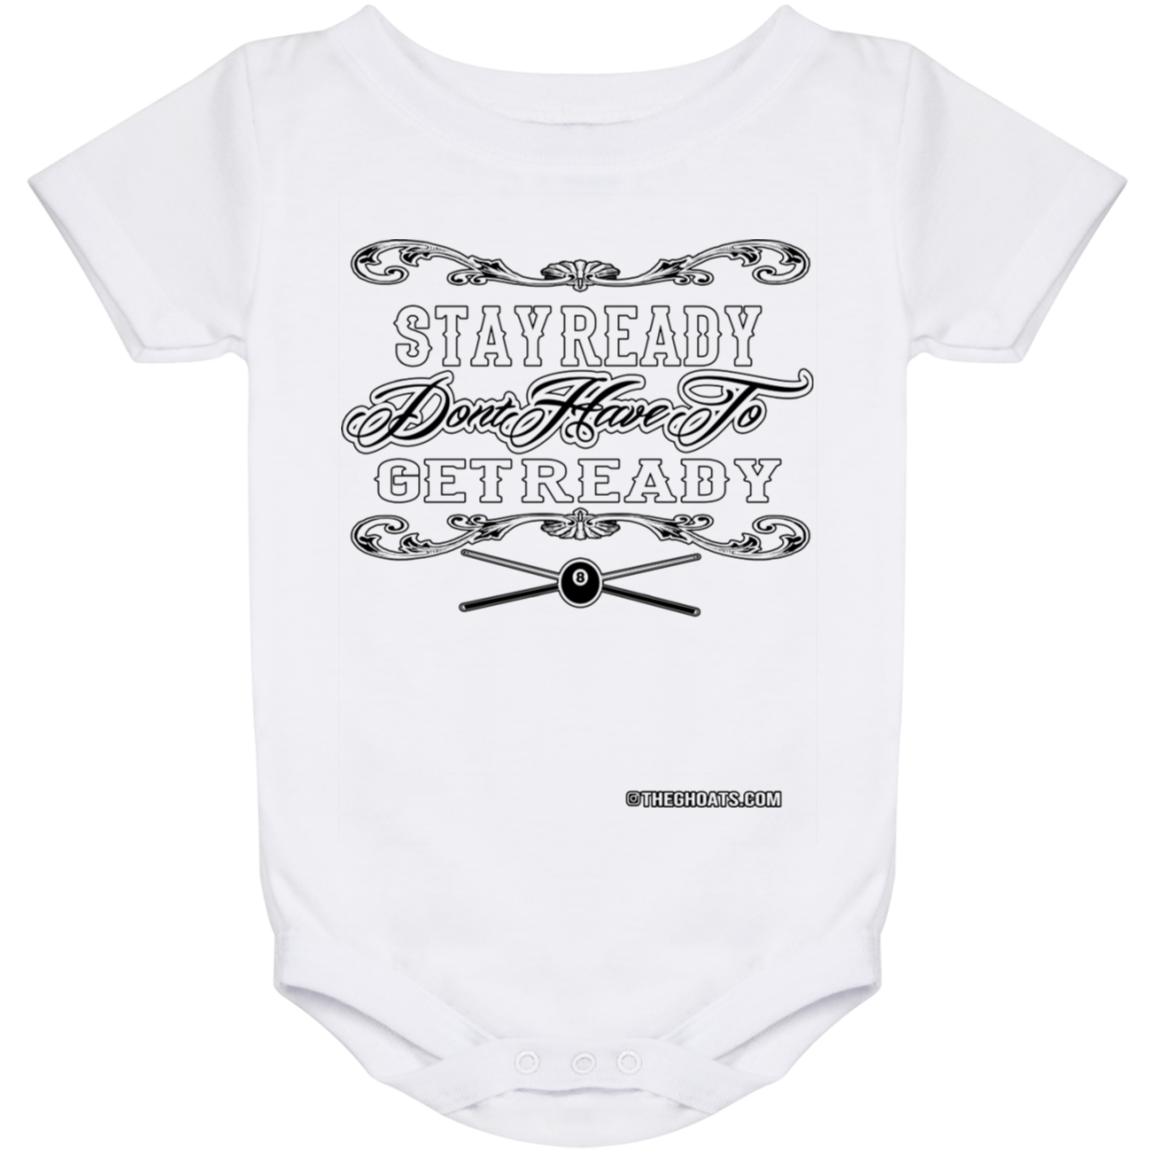 The GHOATS Custom Design #36. Stay Ready Don't Have to Get Ready. Ver 2/2. Baby Onesie 24 Month